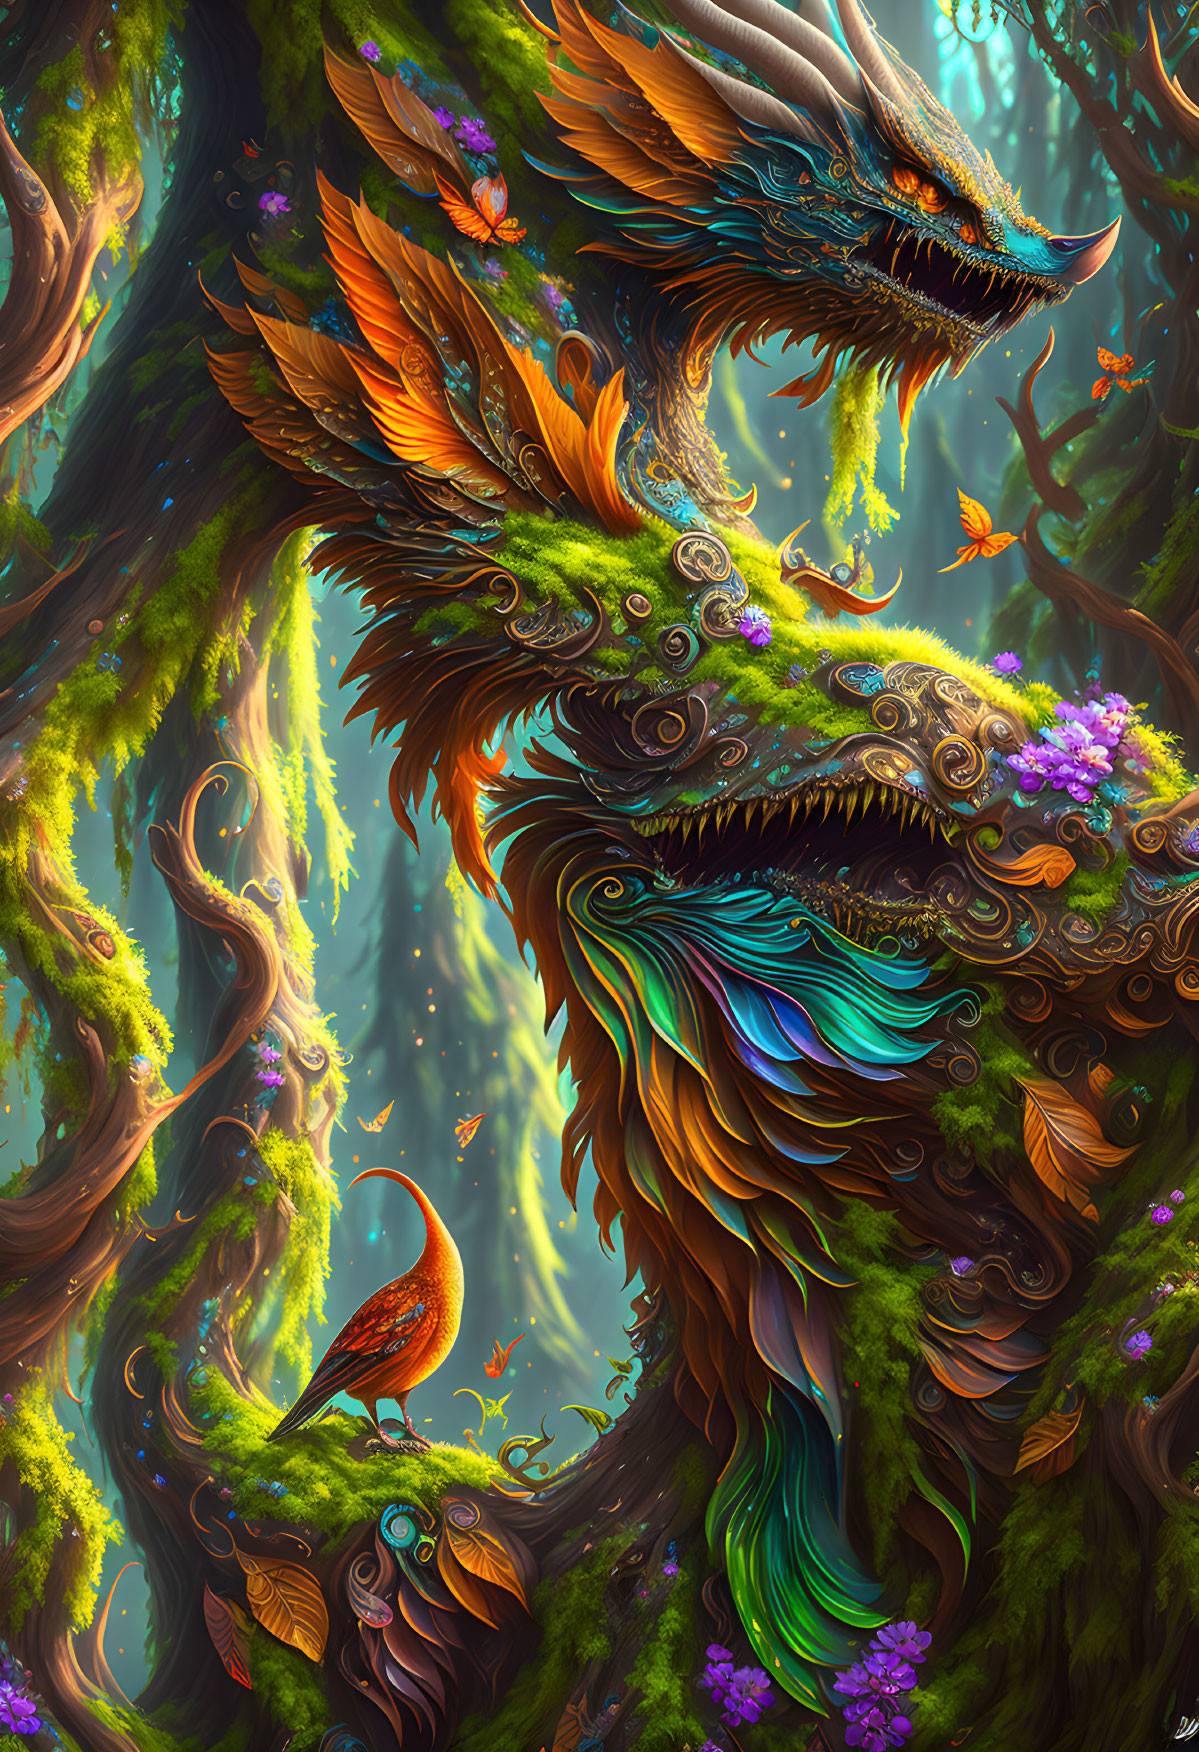 Mythical dragon in lush forest with vibrant foliage and bird